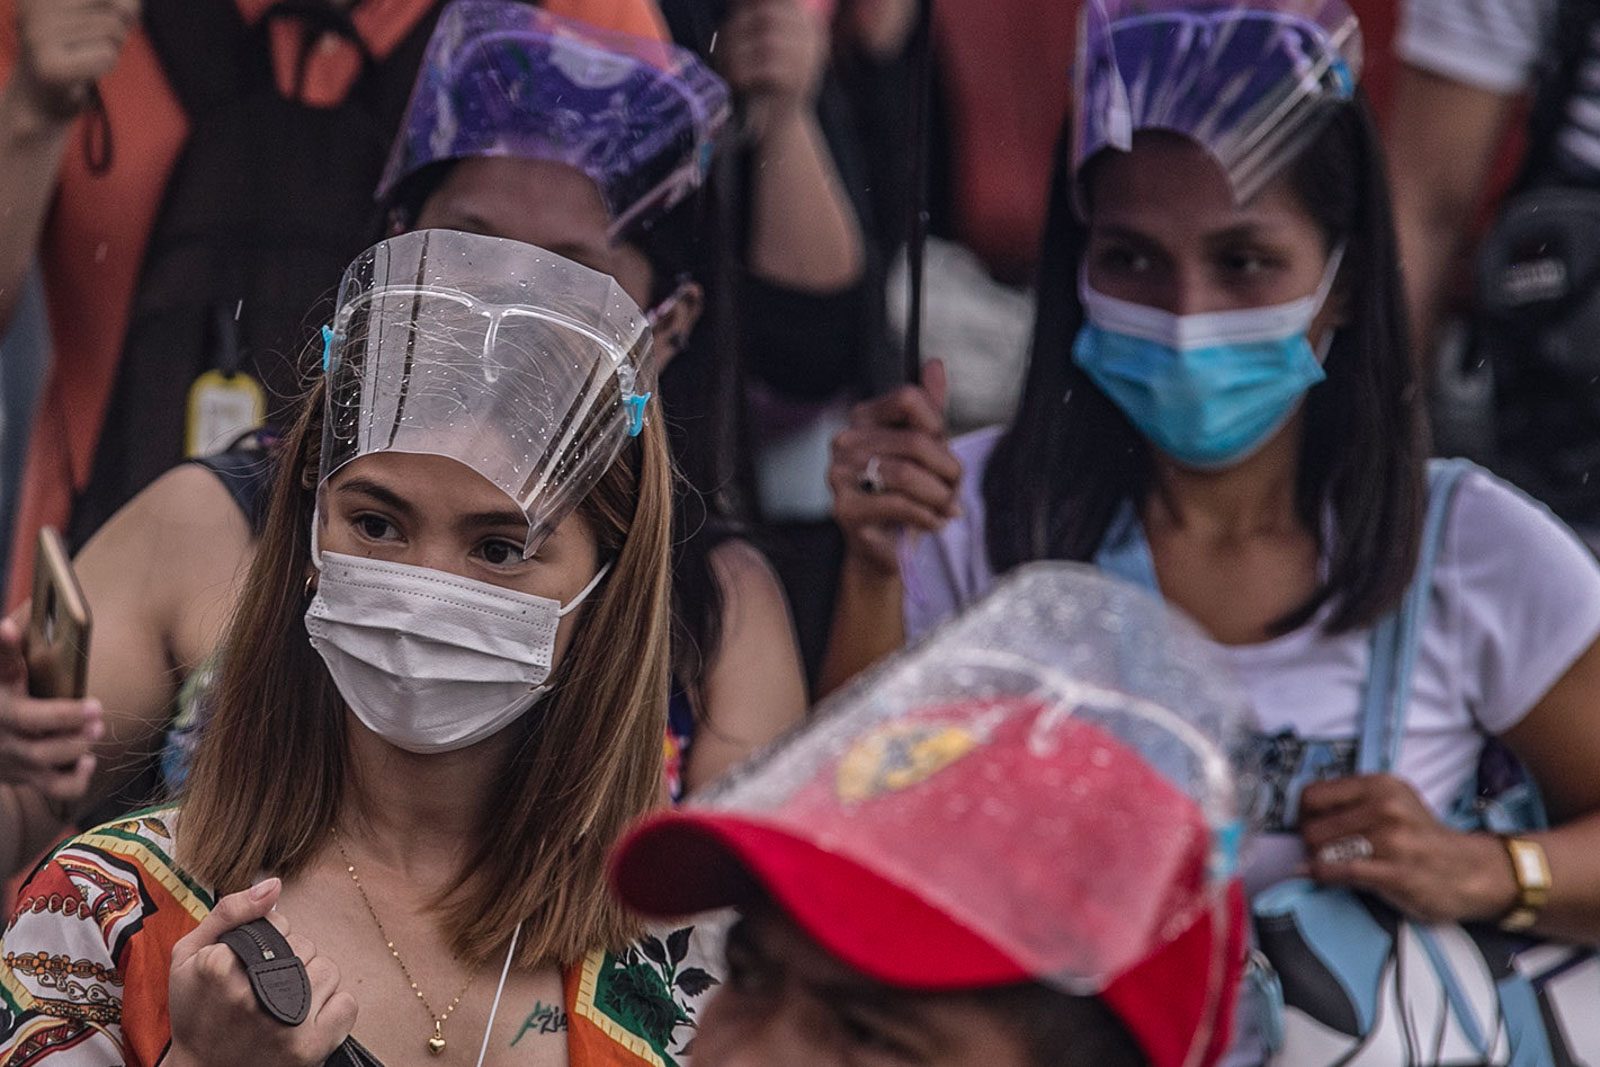 Face shields no longer required in Manila except in medical facilities